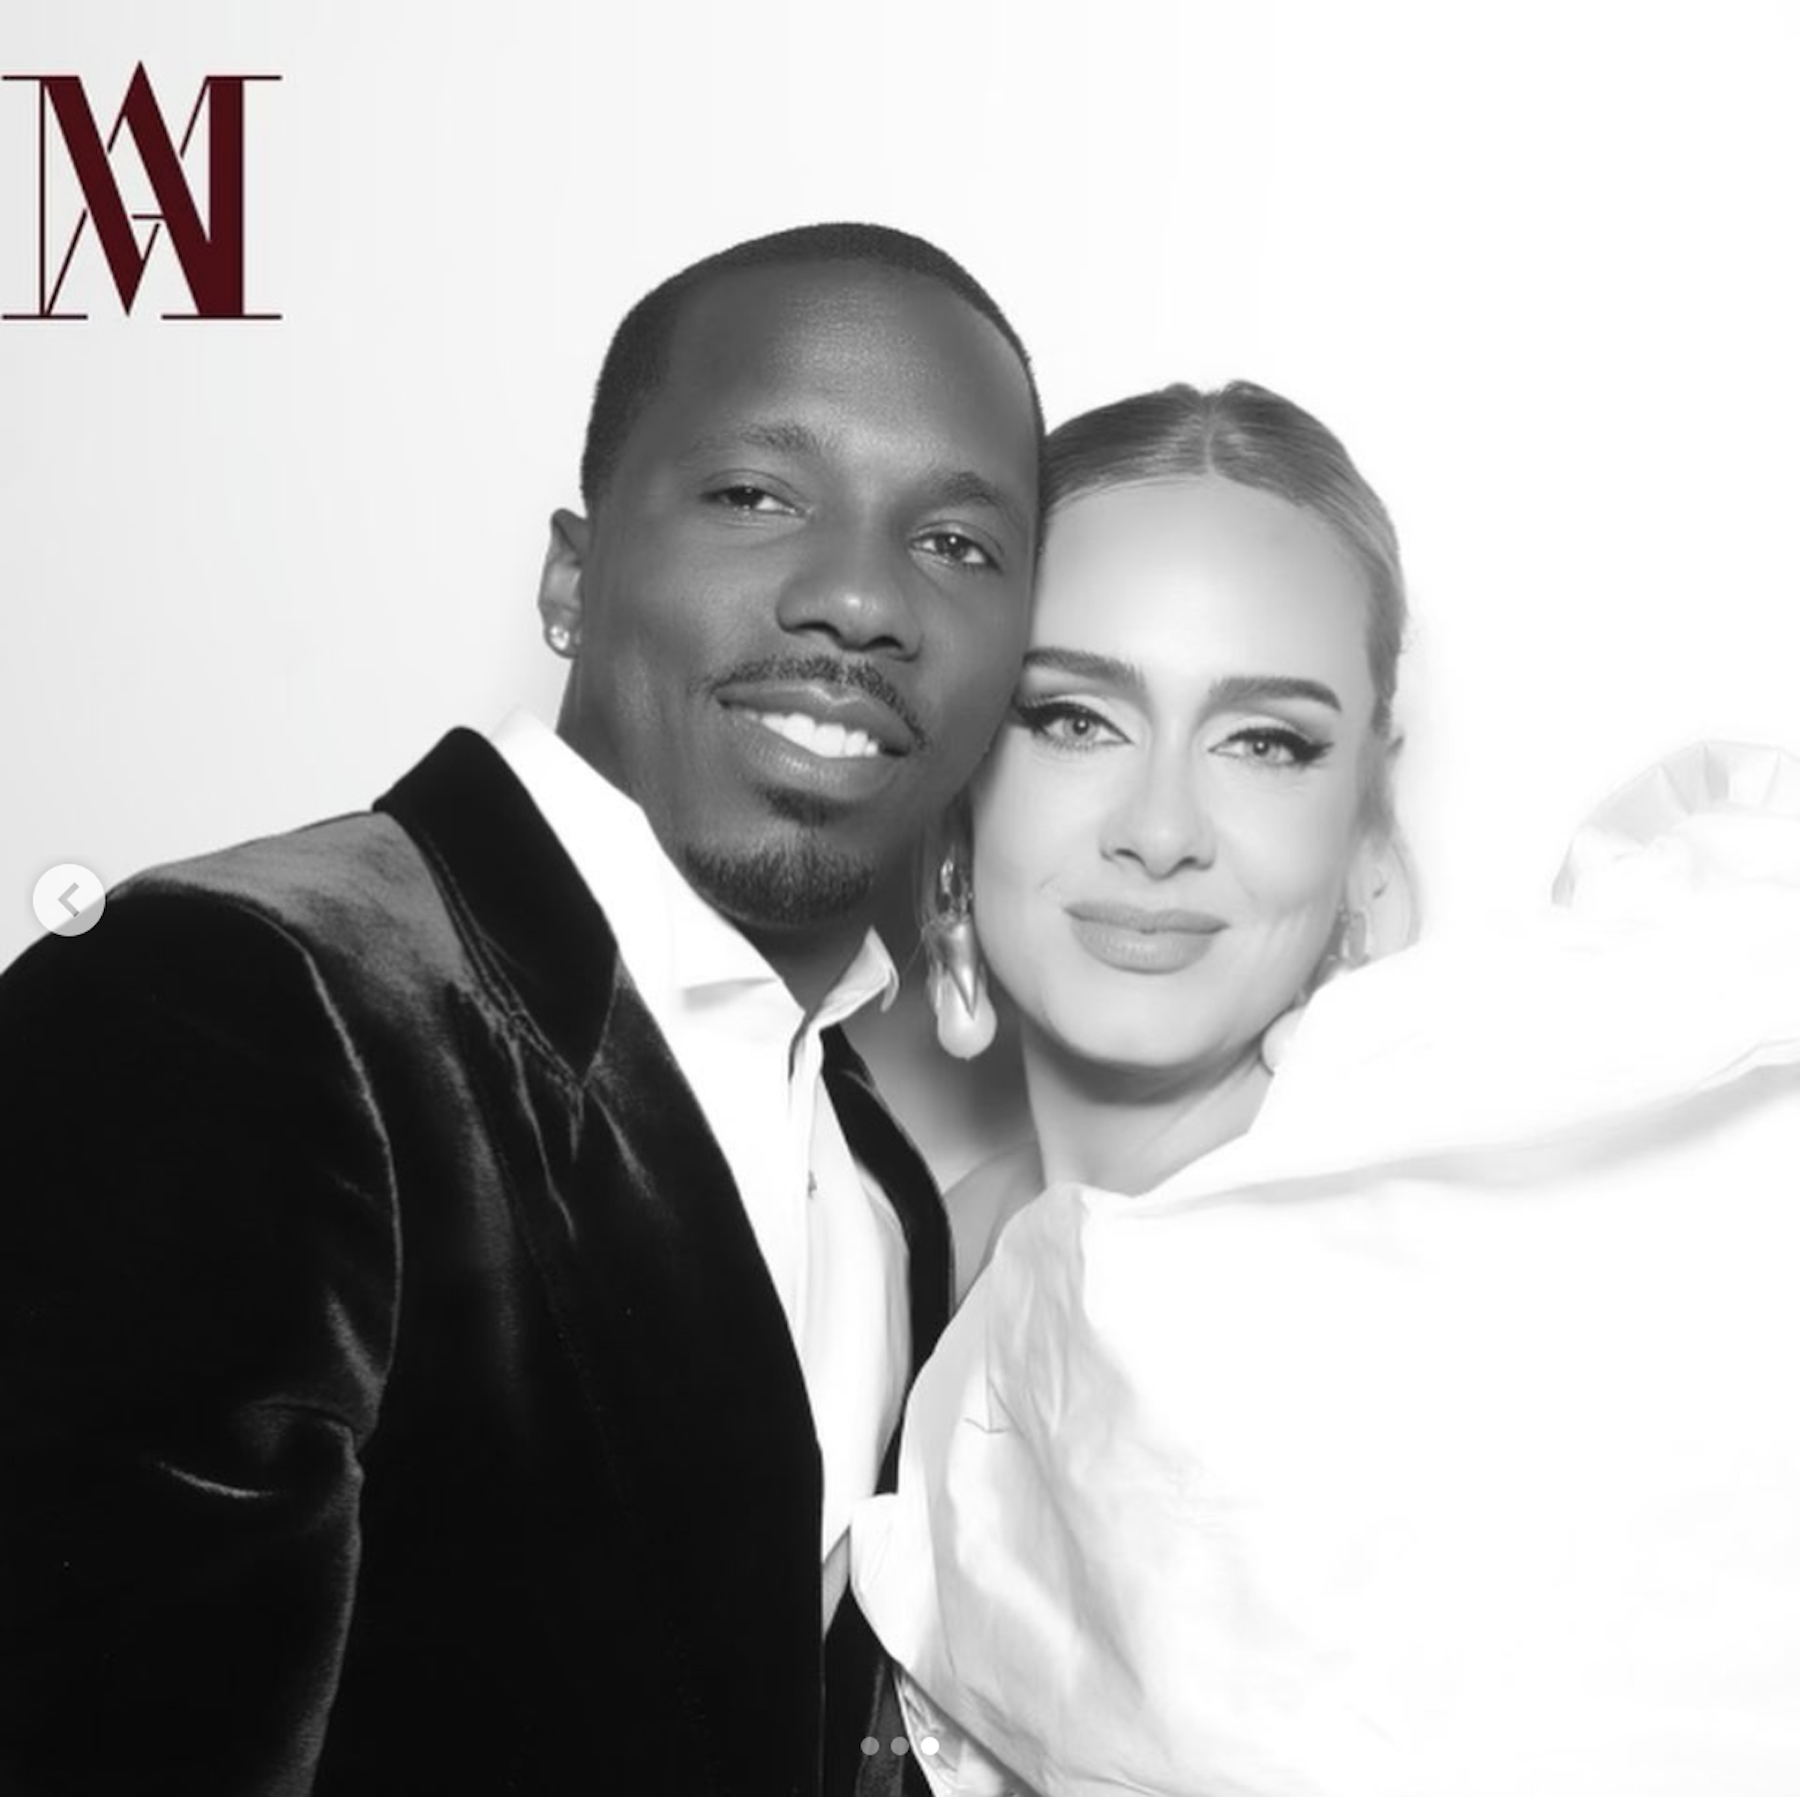 Adele 'engaged to sports agent boyfriend Rich Paul